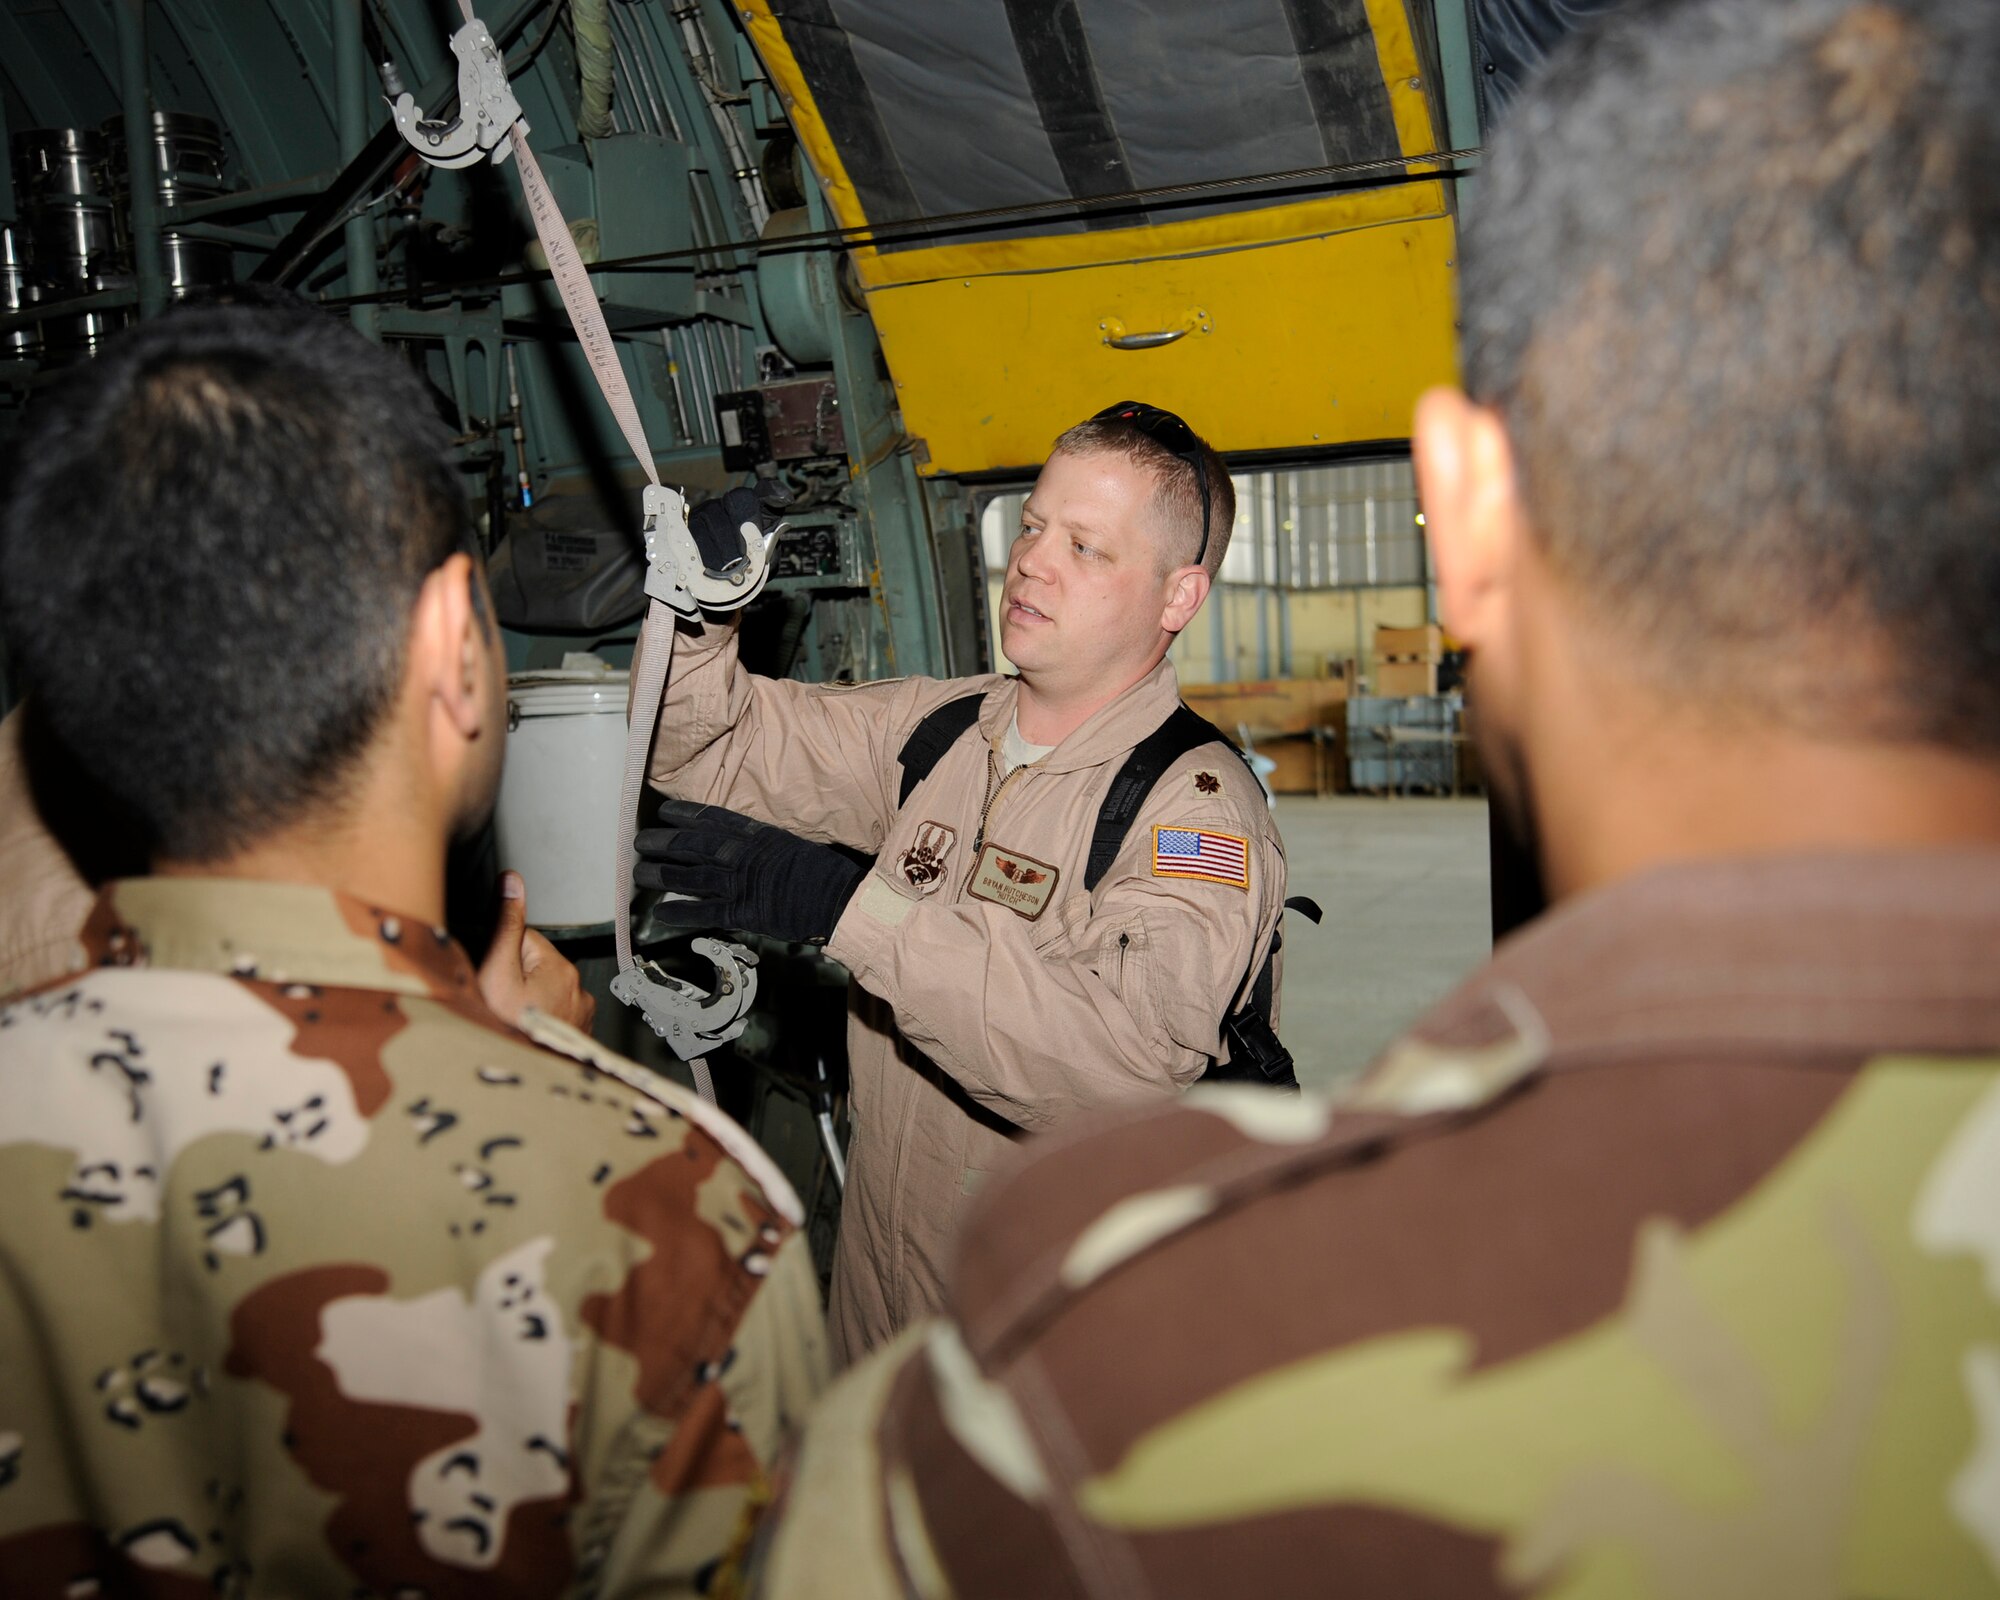 U.S. Air Force Maj. Bryan Hutcheson, aero-medical evacuation basics course director, shows how to inspect the different parts used to secure litters in a C130 Hercules aircraft at New Al-Muthana Air Base, Iraq on Dec. 3. Hutcheson, a Kansas City, Mo. native, is deployed from the USAF School of Aerospace Medicine in San Antonio, Texas. (U.S. Air Force photo/Staff Sgt. Paul Villanueva II)